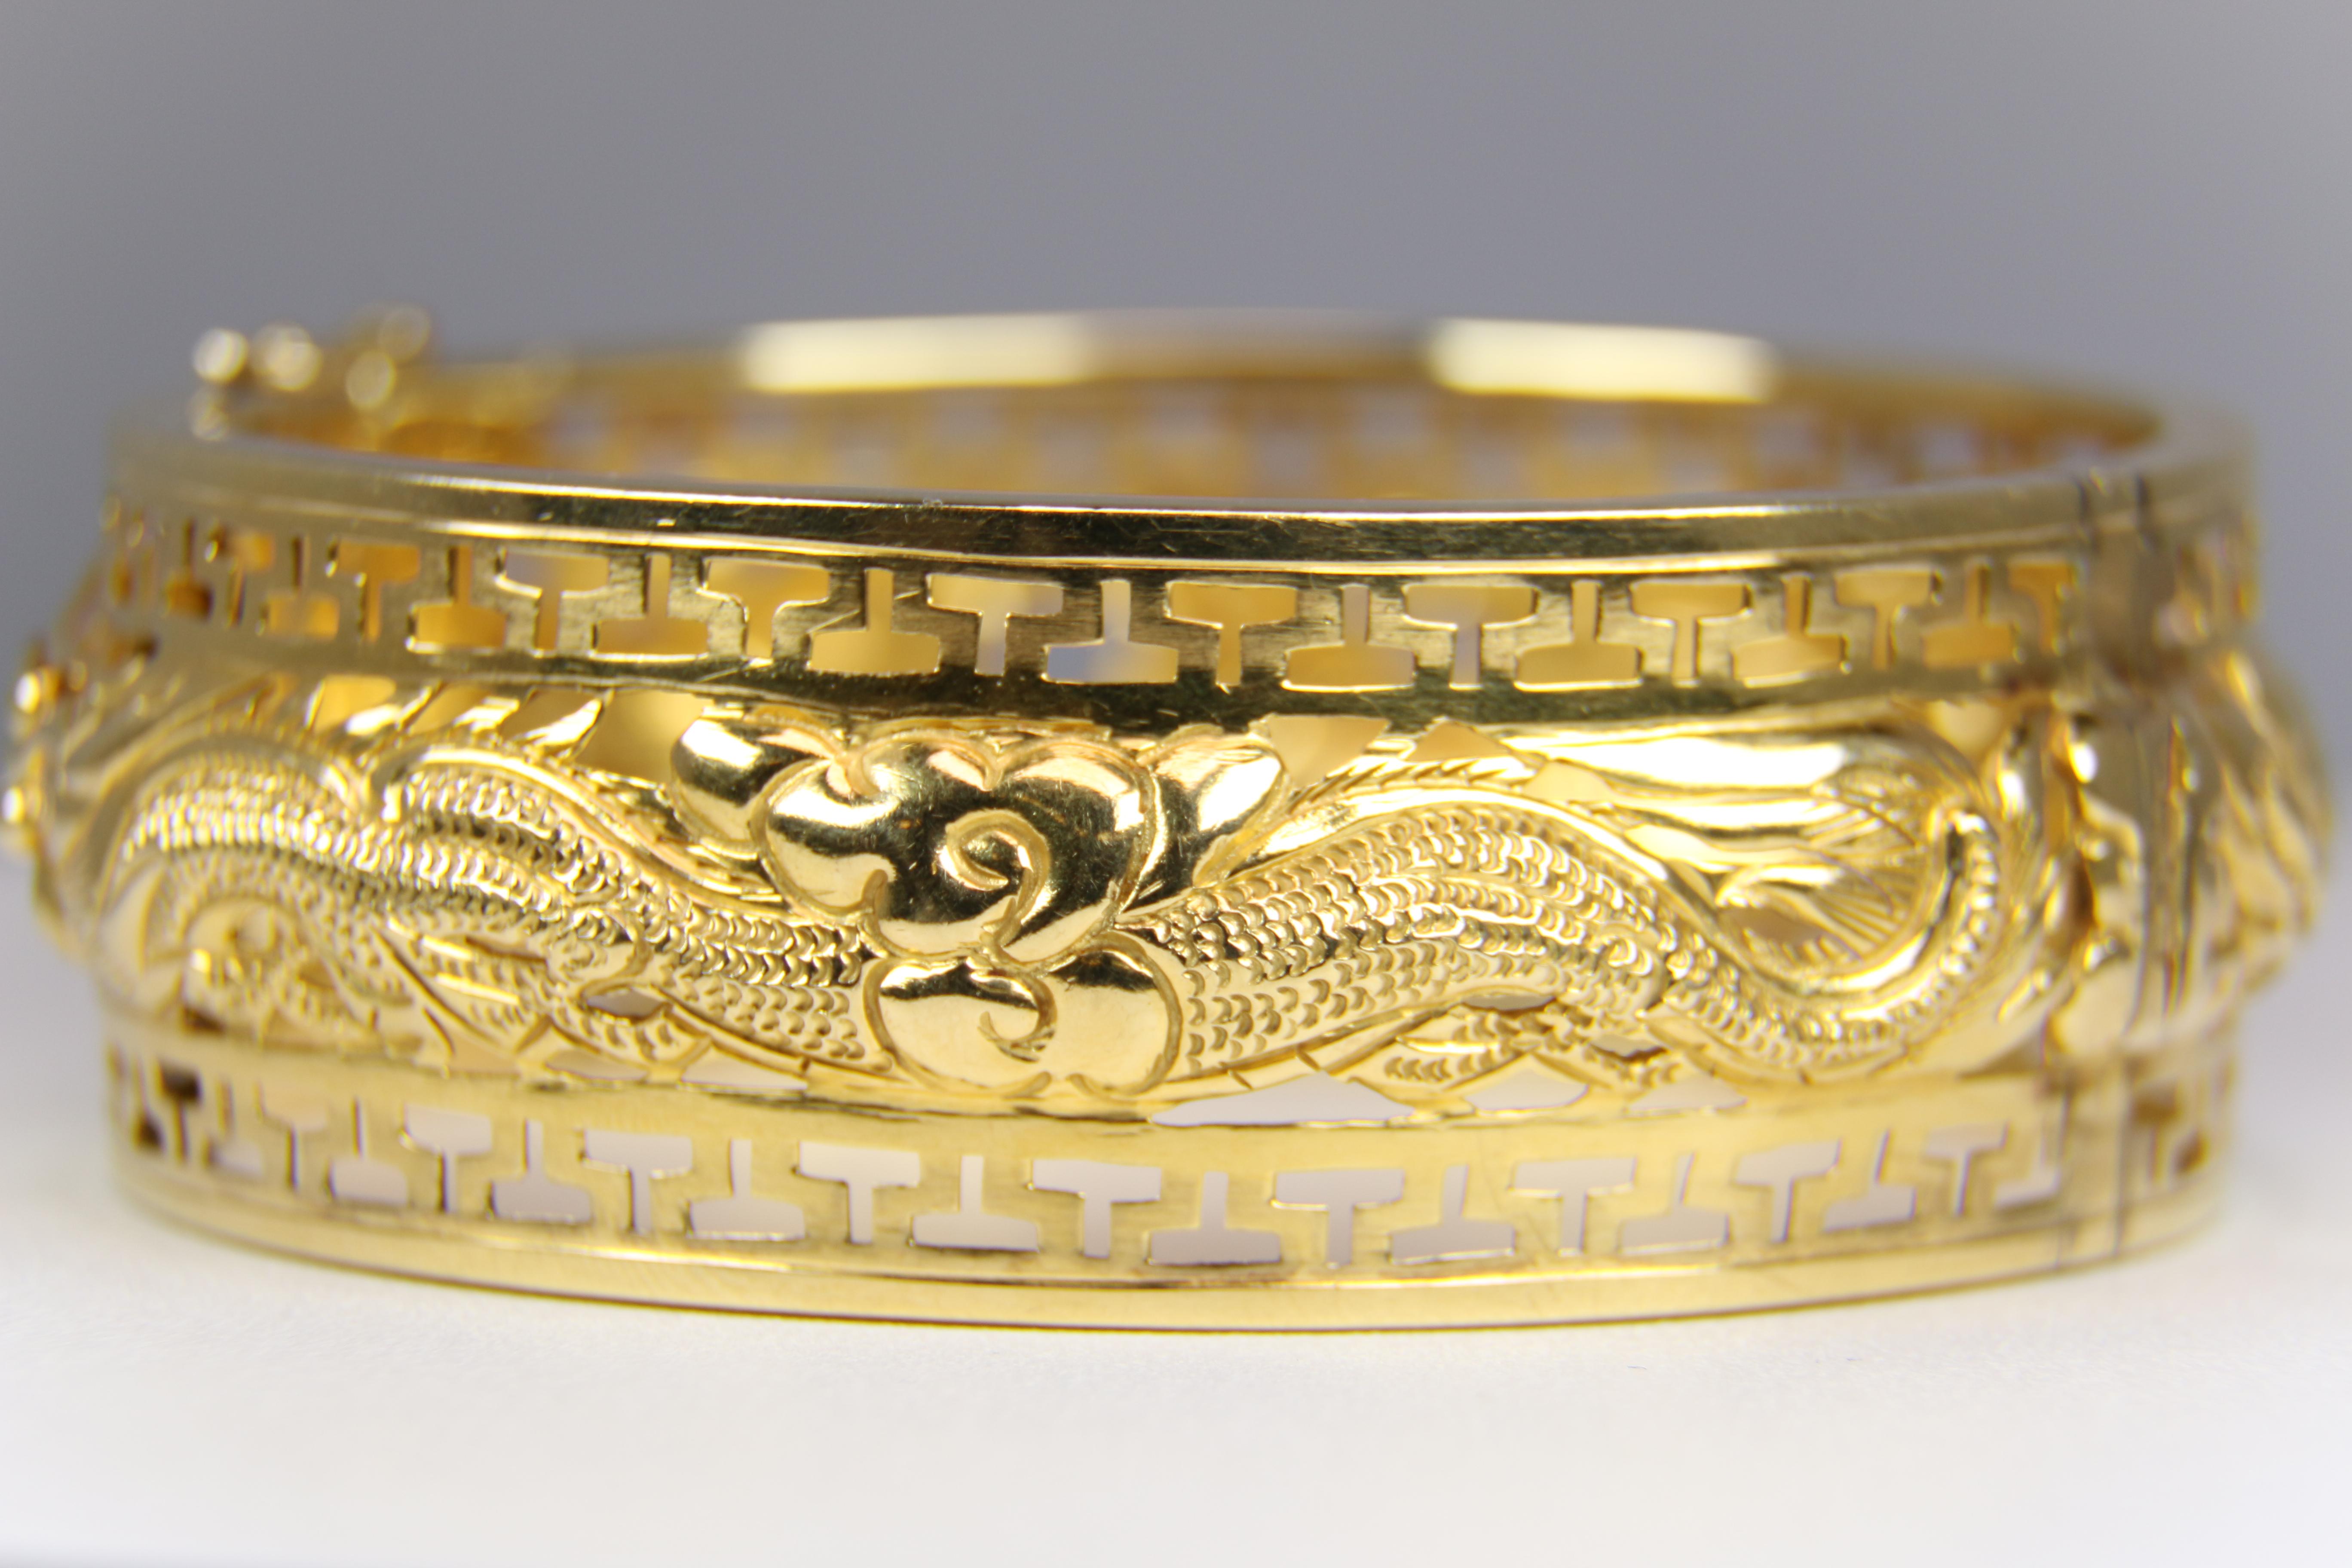 Gorgeous Wide Bangle Bracelet in 18K Yellow Gold